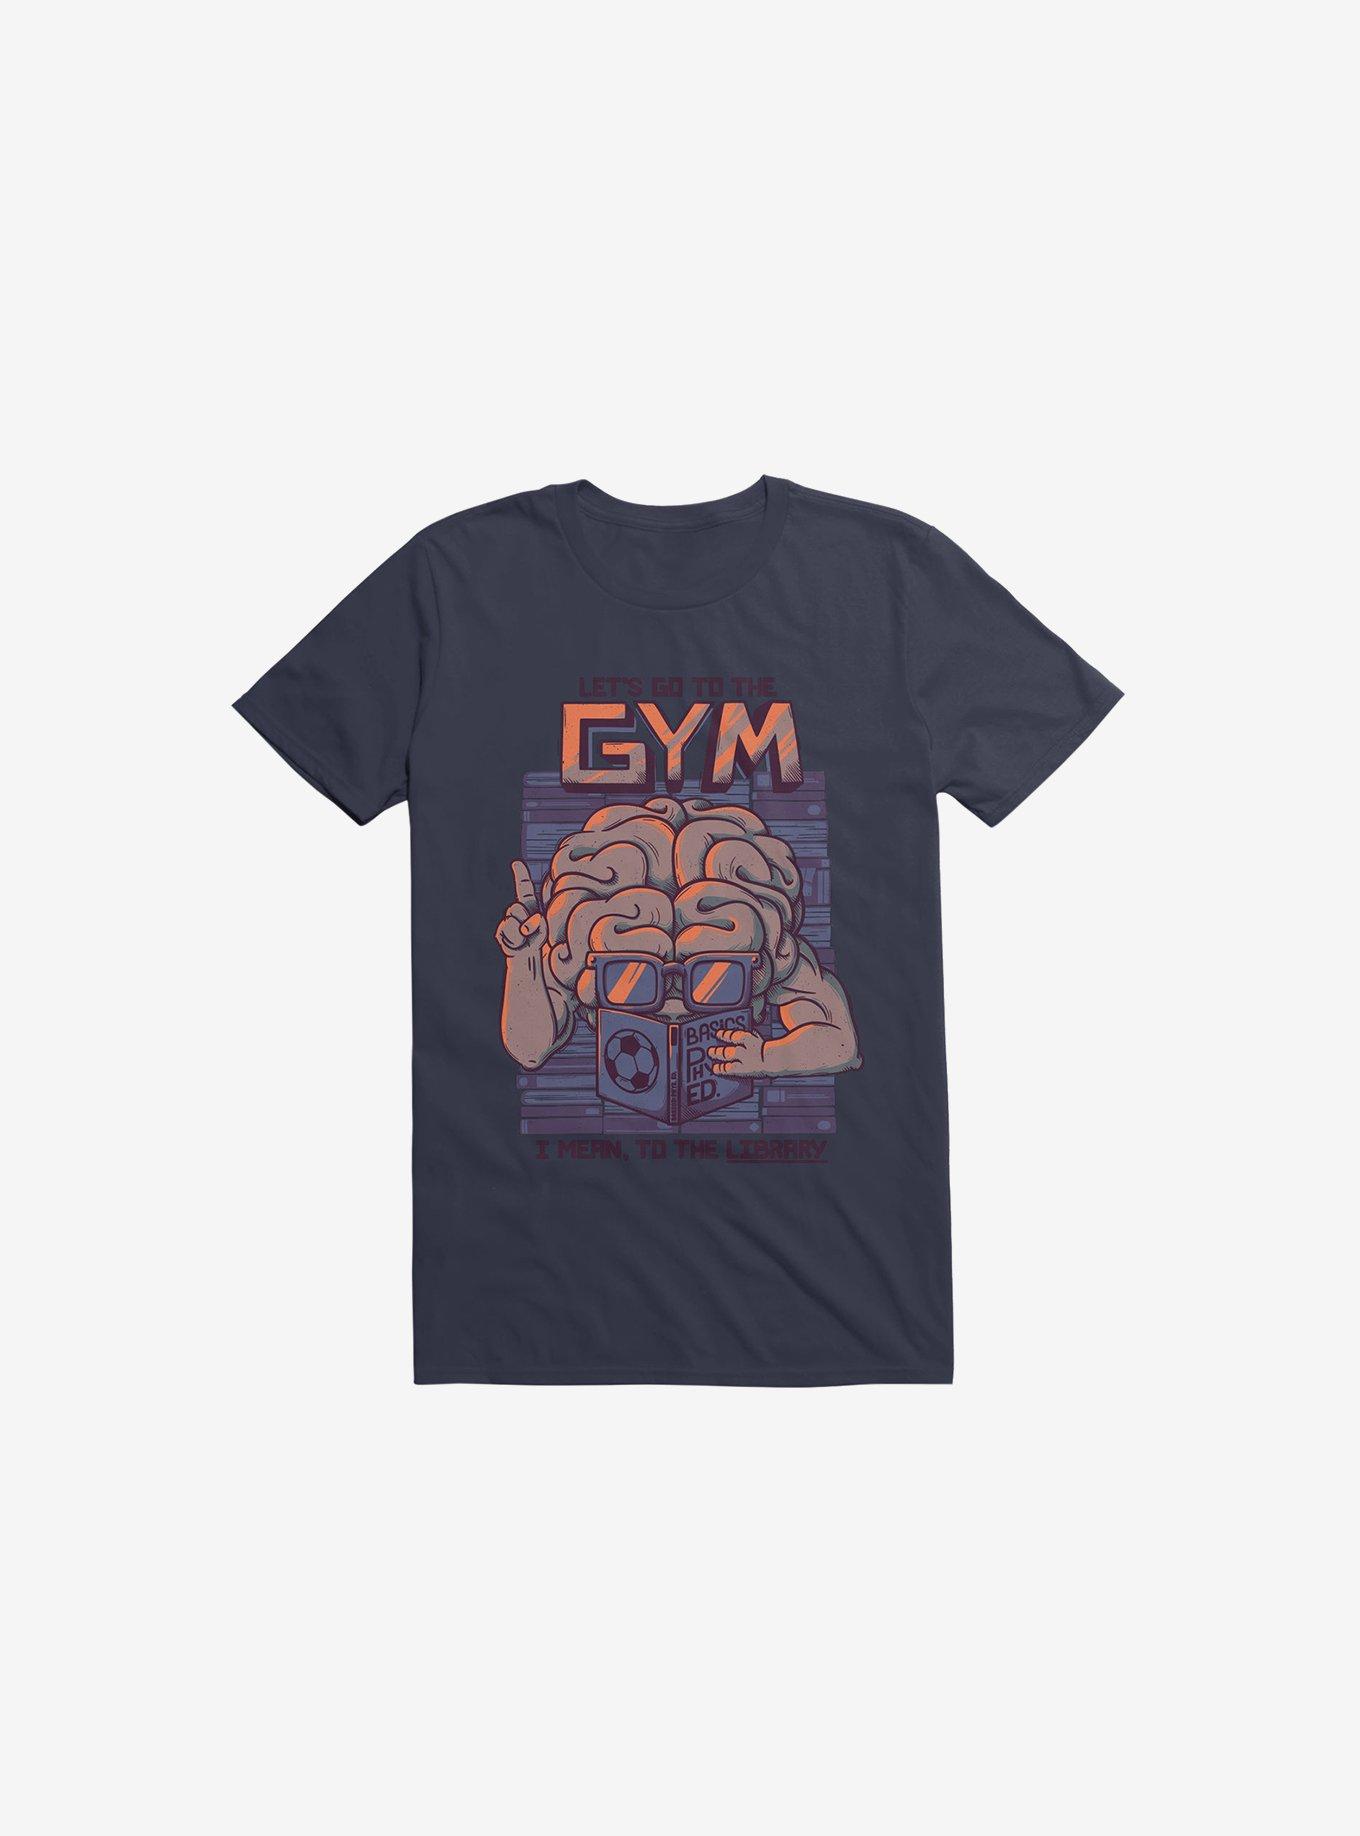 Let's Go To The Gym Navy Blue T-Shirt